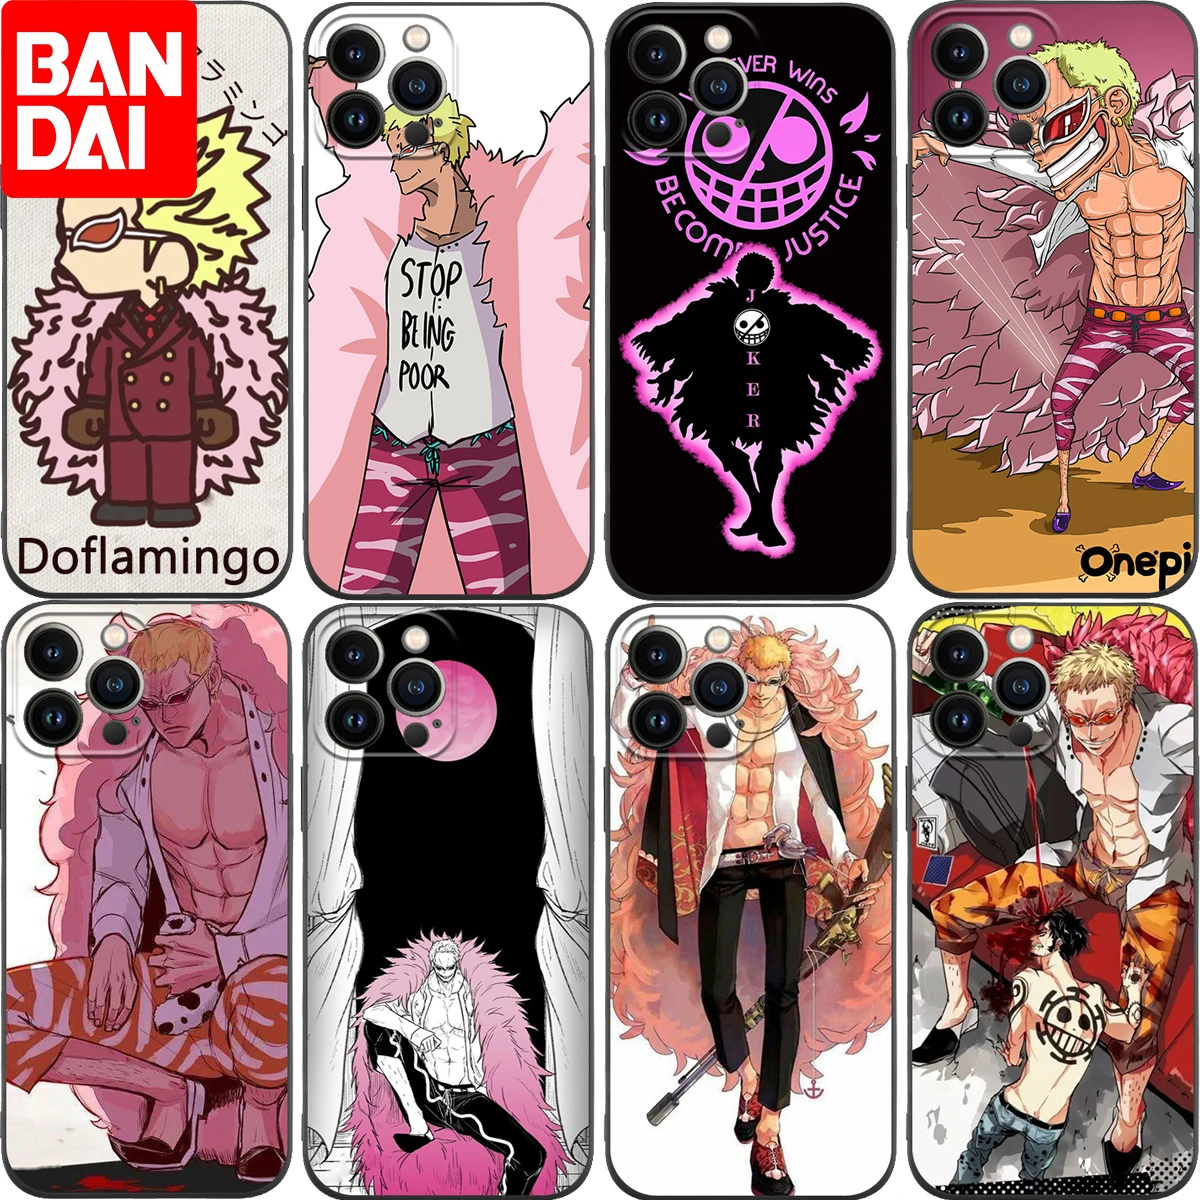 iphone xr card case Doflamingo One Piece Anime Phone Case For iPhone 13 12 Pro Max 11 Mini XS Max X XR 7 8 Plus Back Cover Soft TPU Shell Fundas cheap iphone xr cases